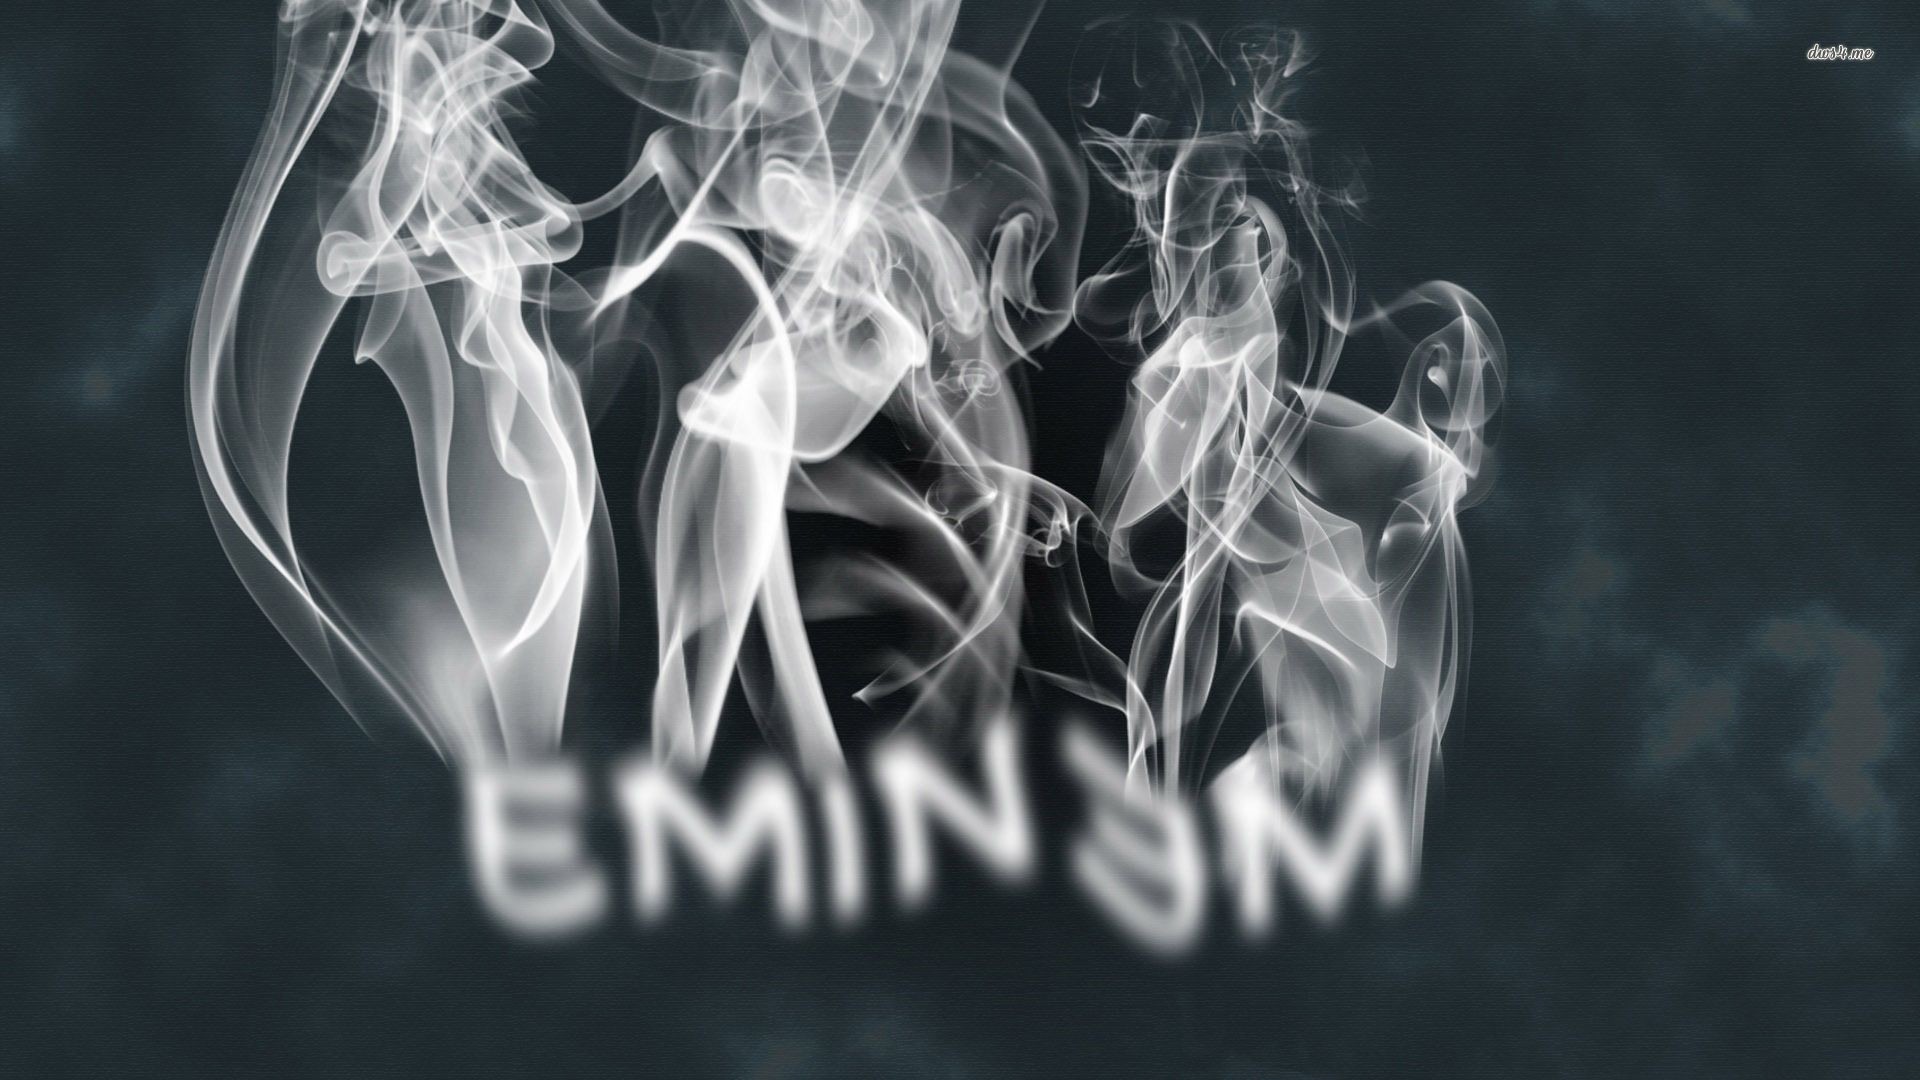 1920x1080 Eminem HD Wallpapers and Backgrounds